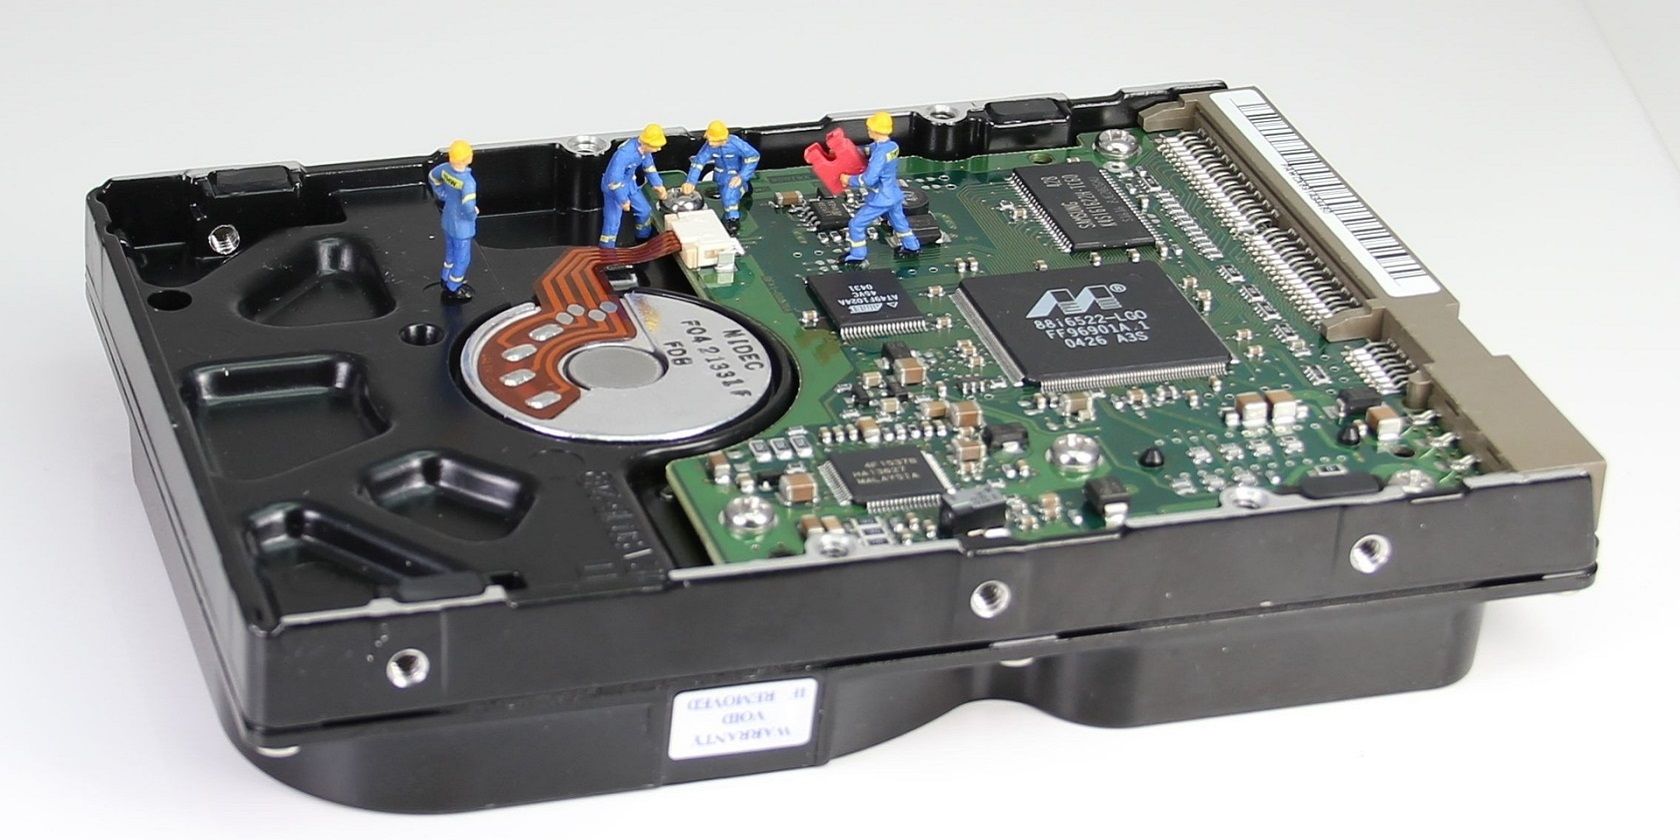 Miniature figures fixing the internal hard drive of a PC